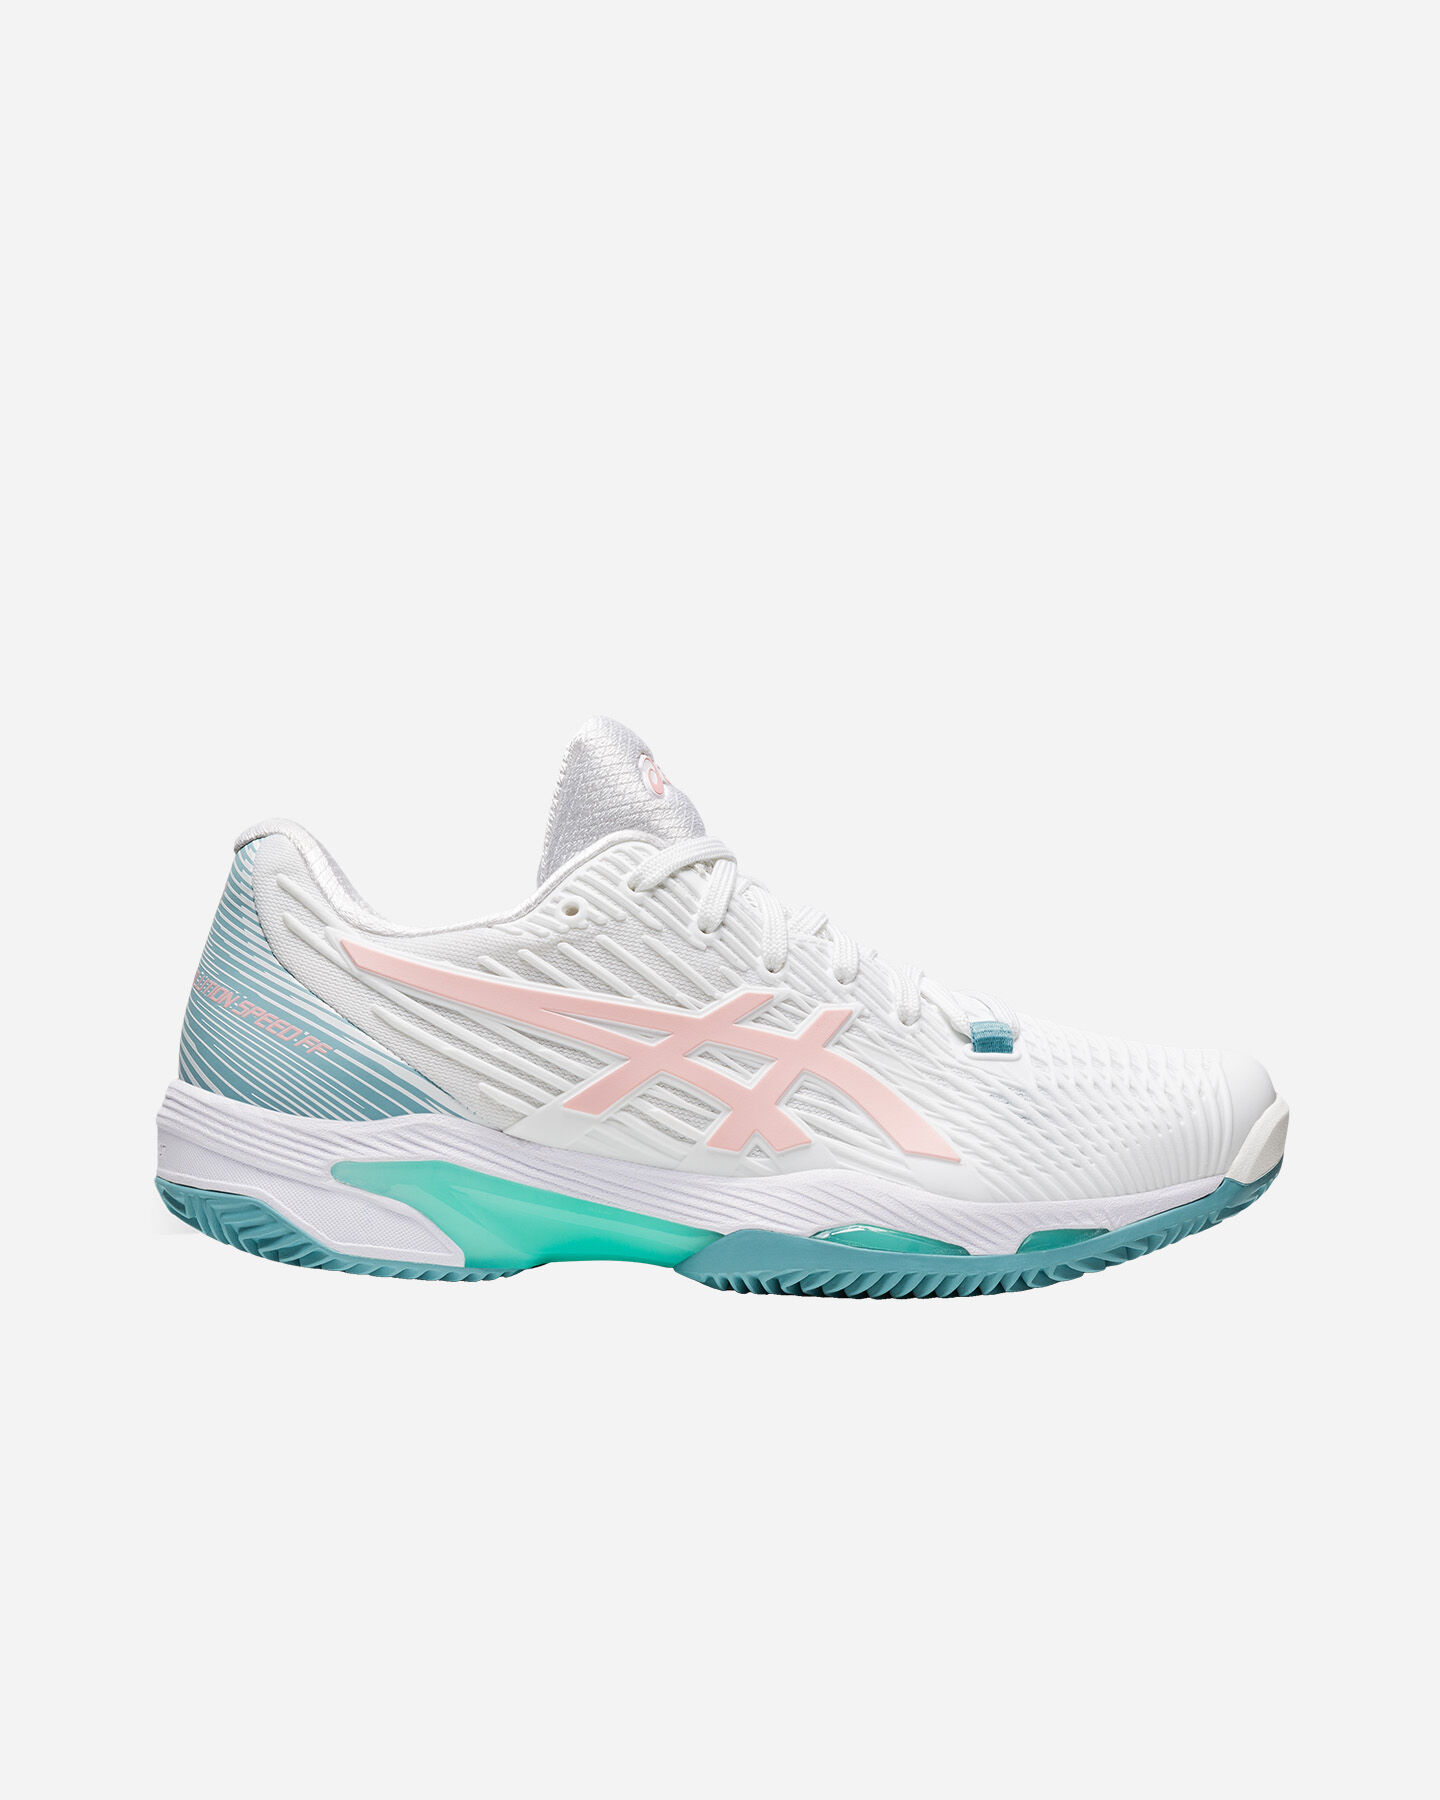  Scarpe tennis ASICS SOLUTION SPEED FF 2 CLAY W S5469494|103|5 scatto 0